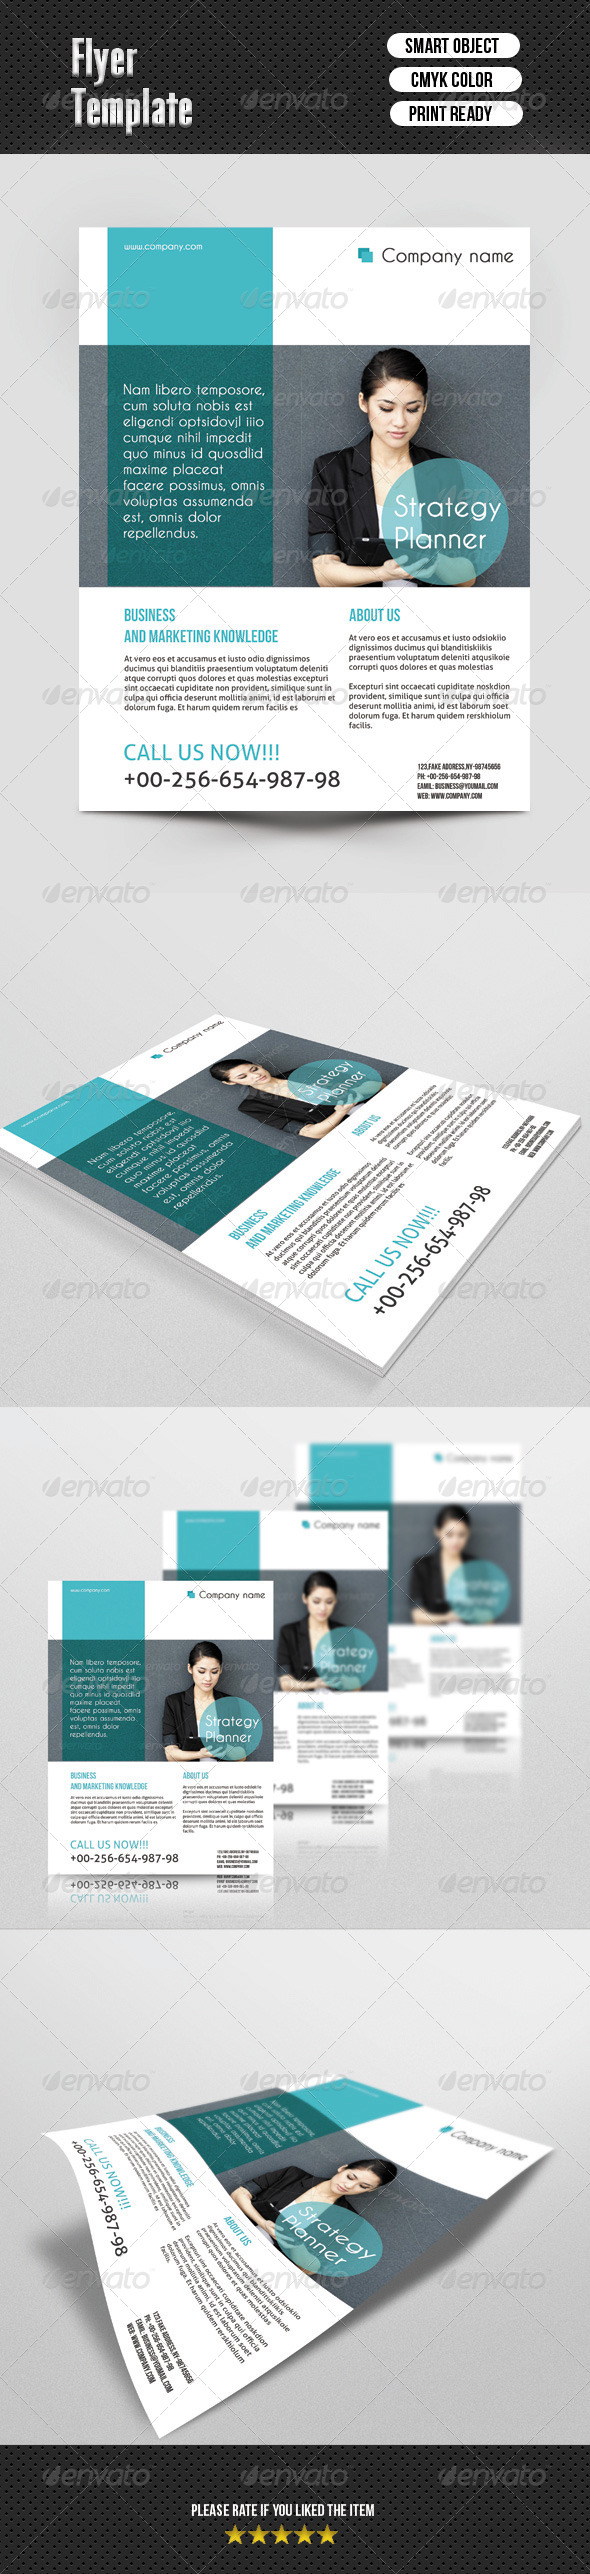 Busines Flayer Template